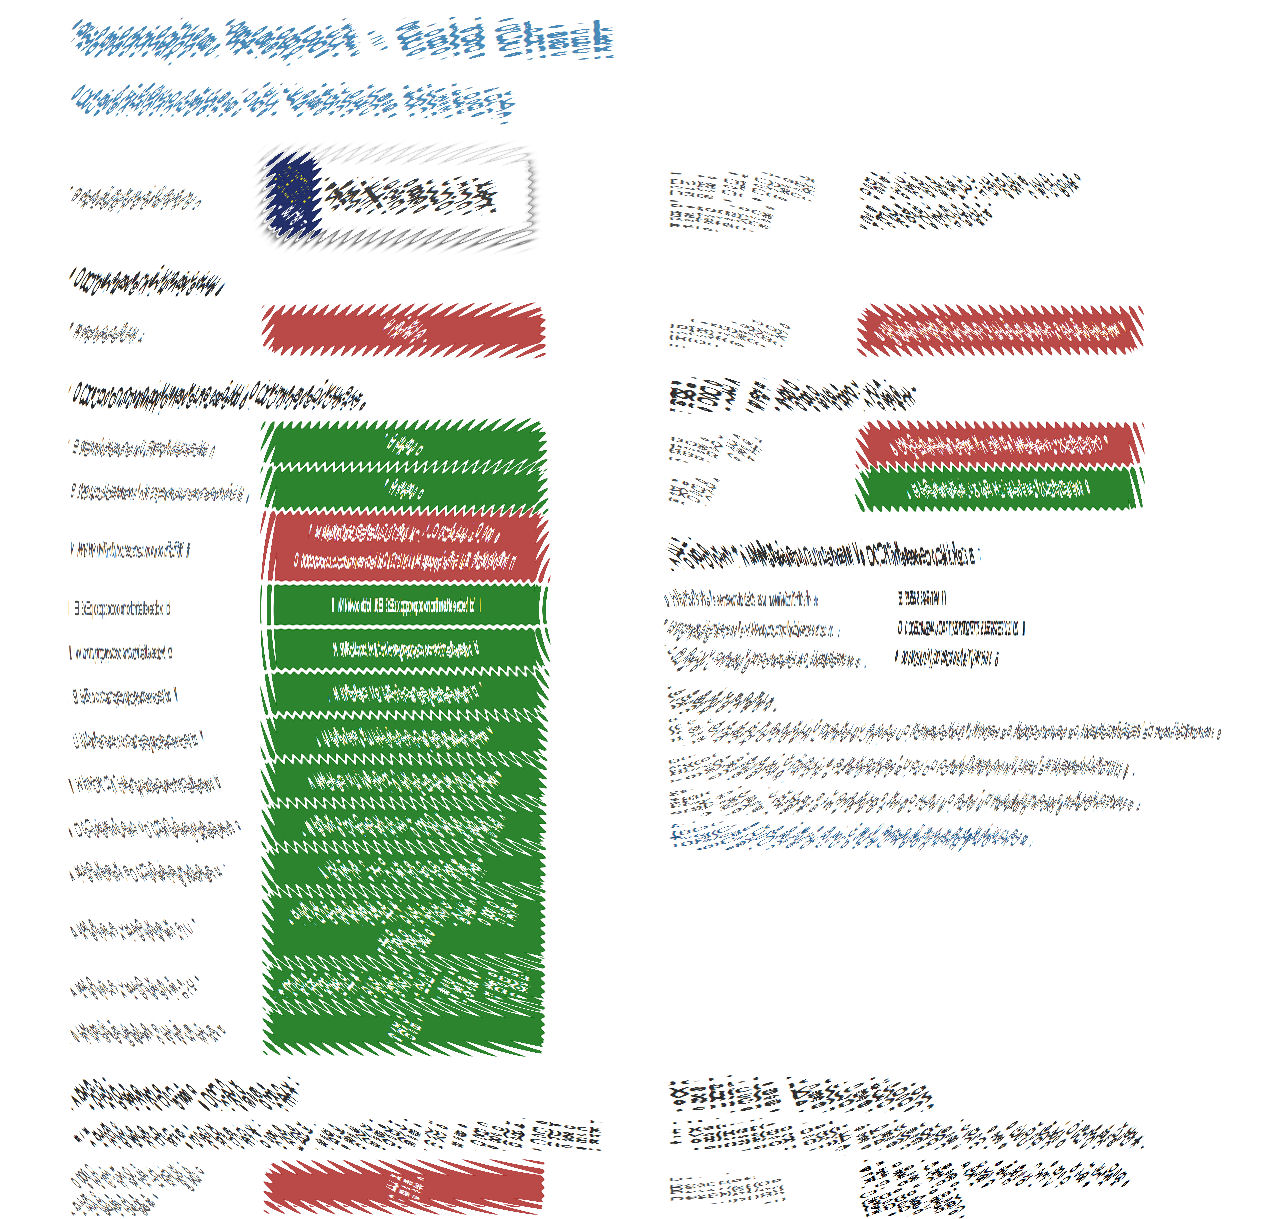 View a Sample Vehicle Report